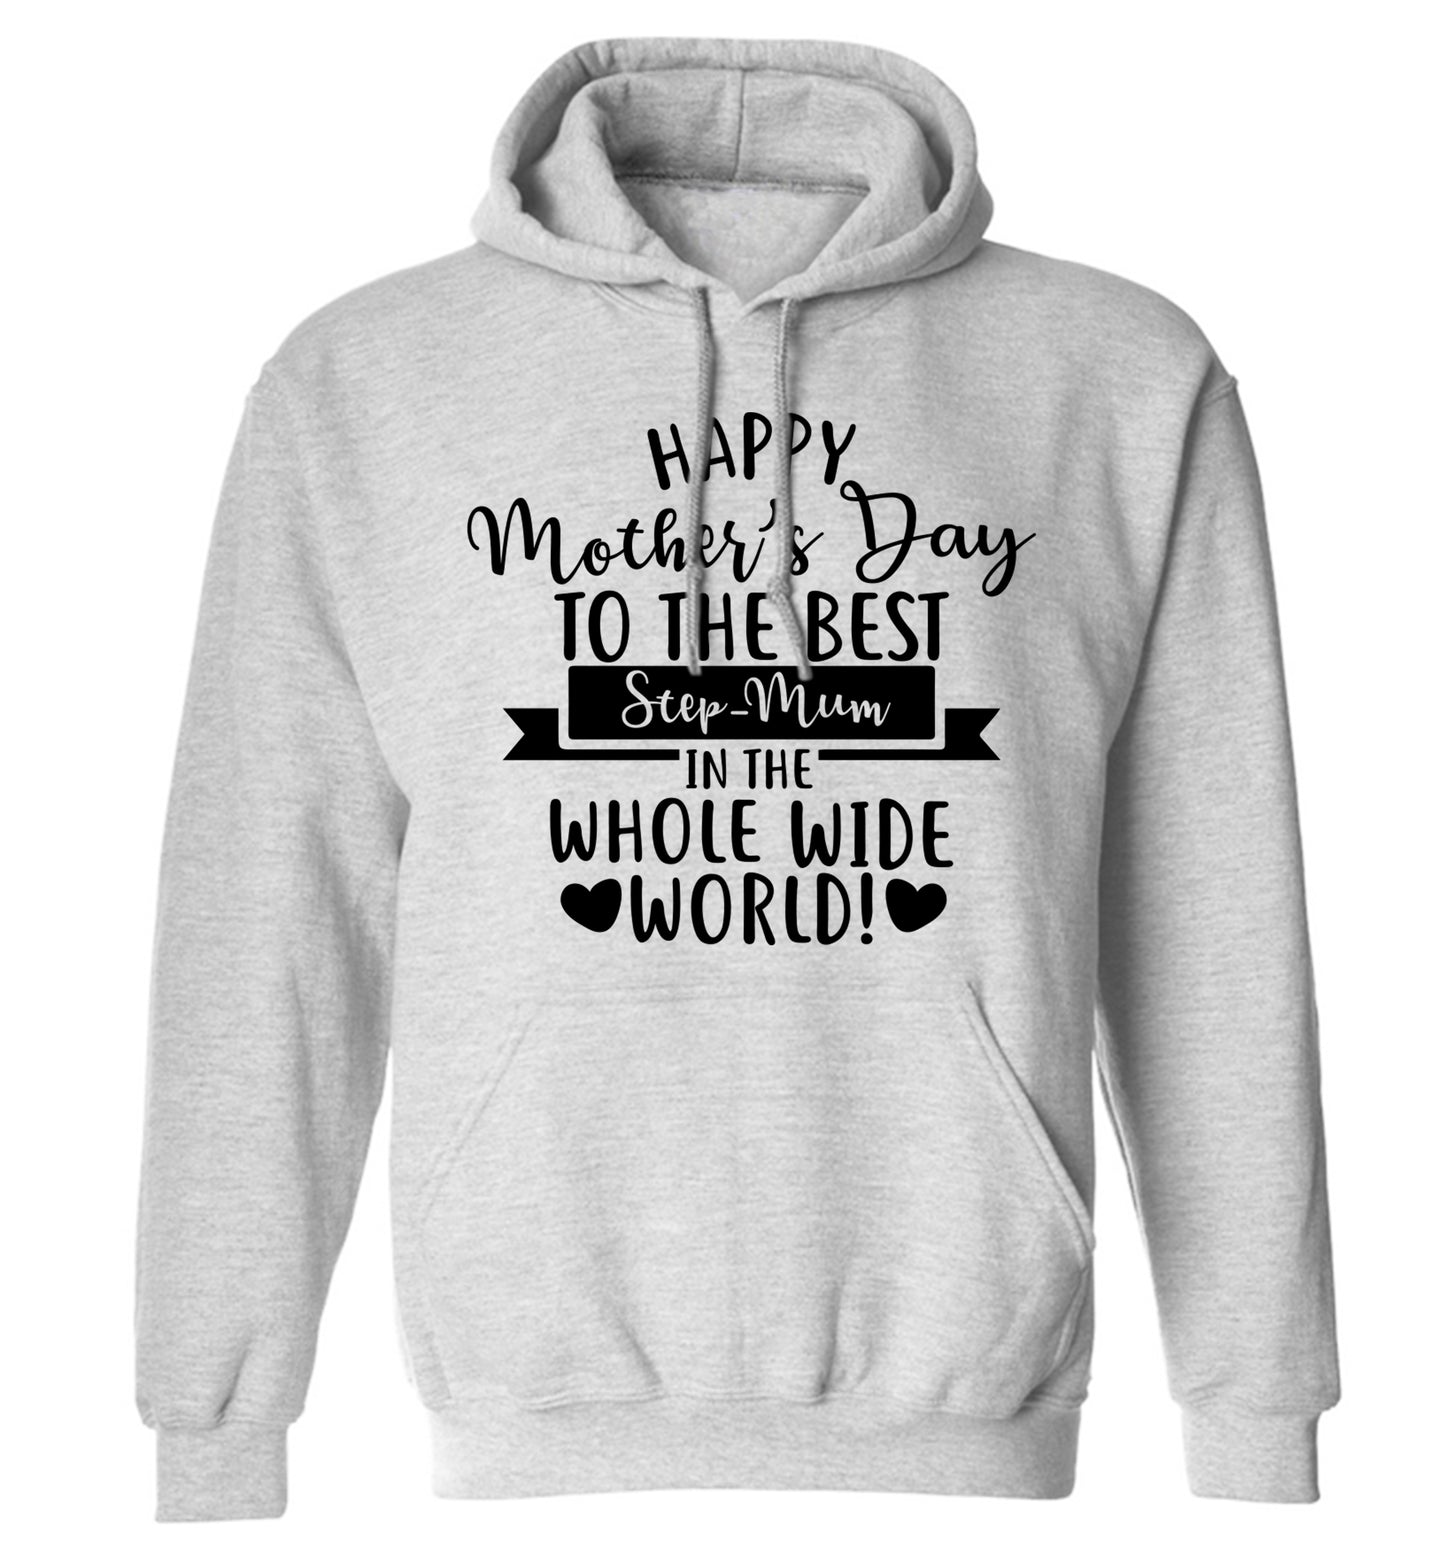 Happy mother's day to the best step-mum in the world adults unisex grey hoodie 2XL